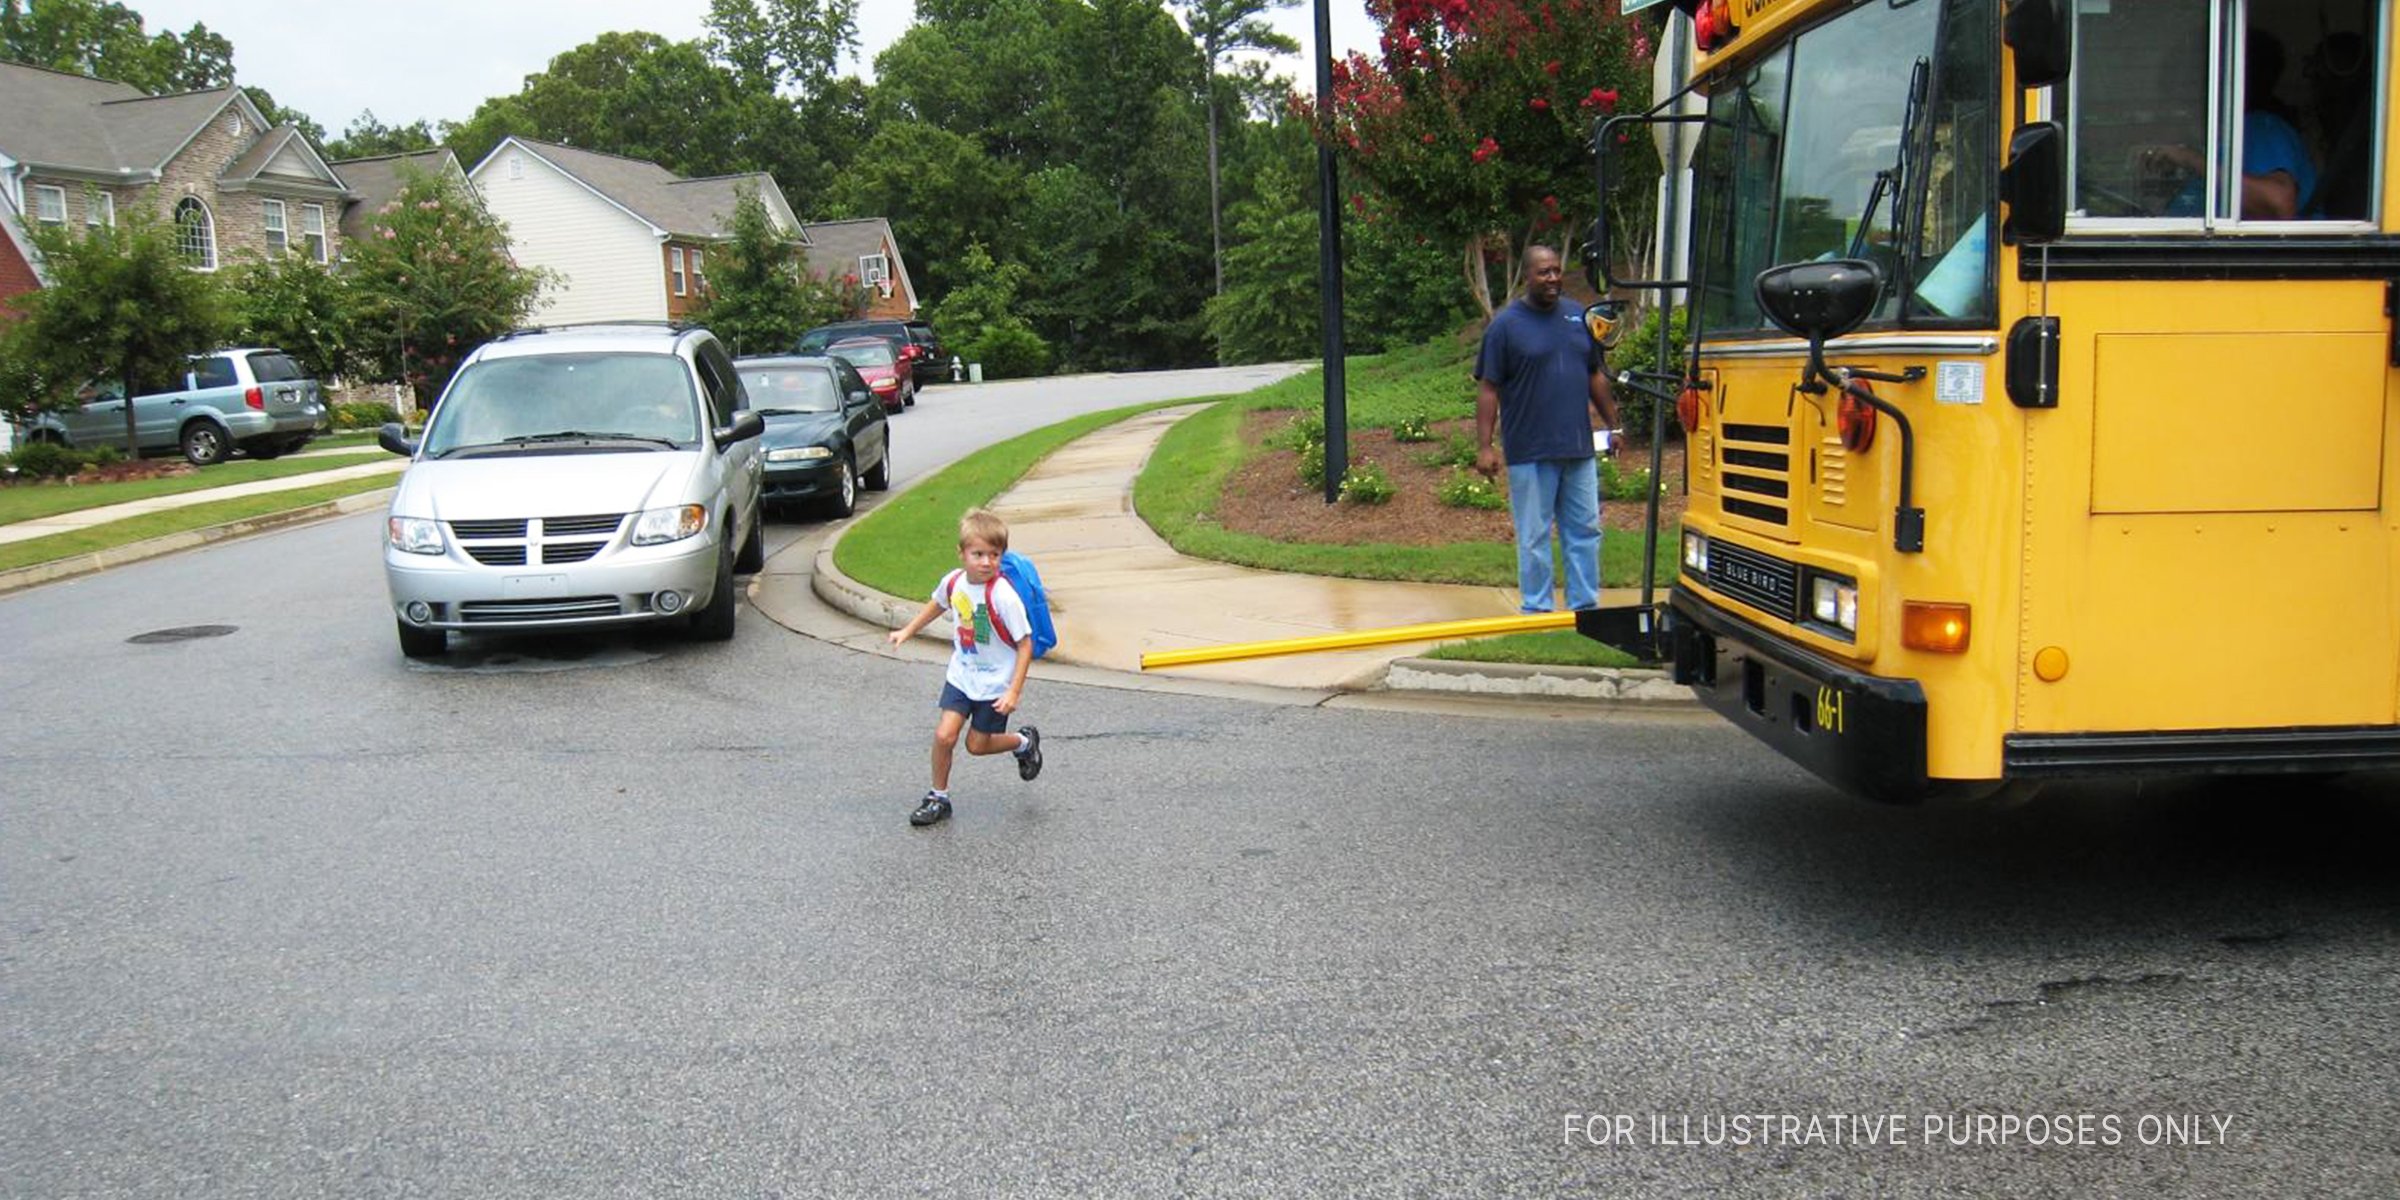 Source: Flickr / ThrasherDave (CC BY-SA 2.0) | Little boy running across a road. 